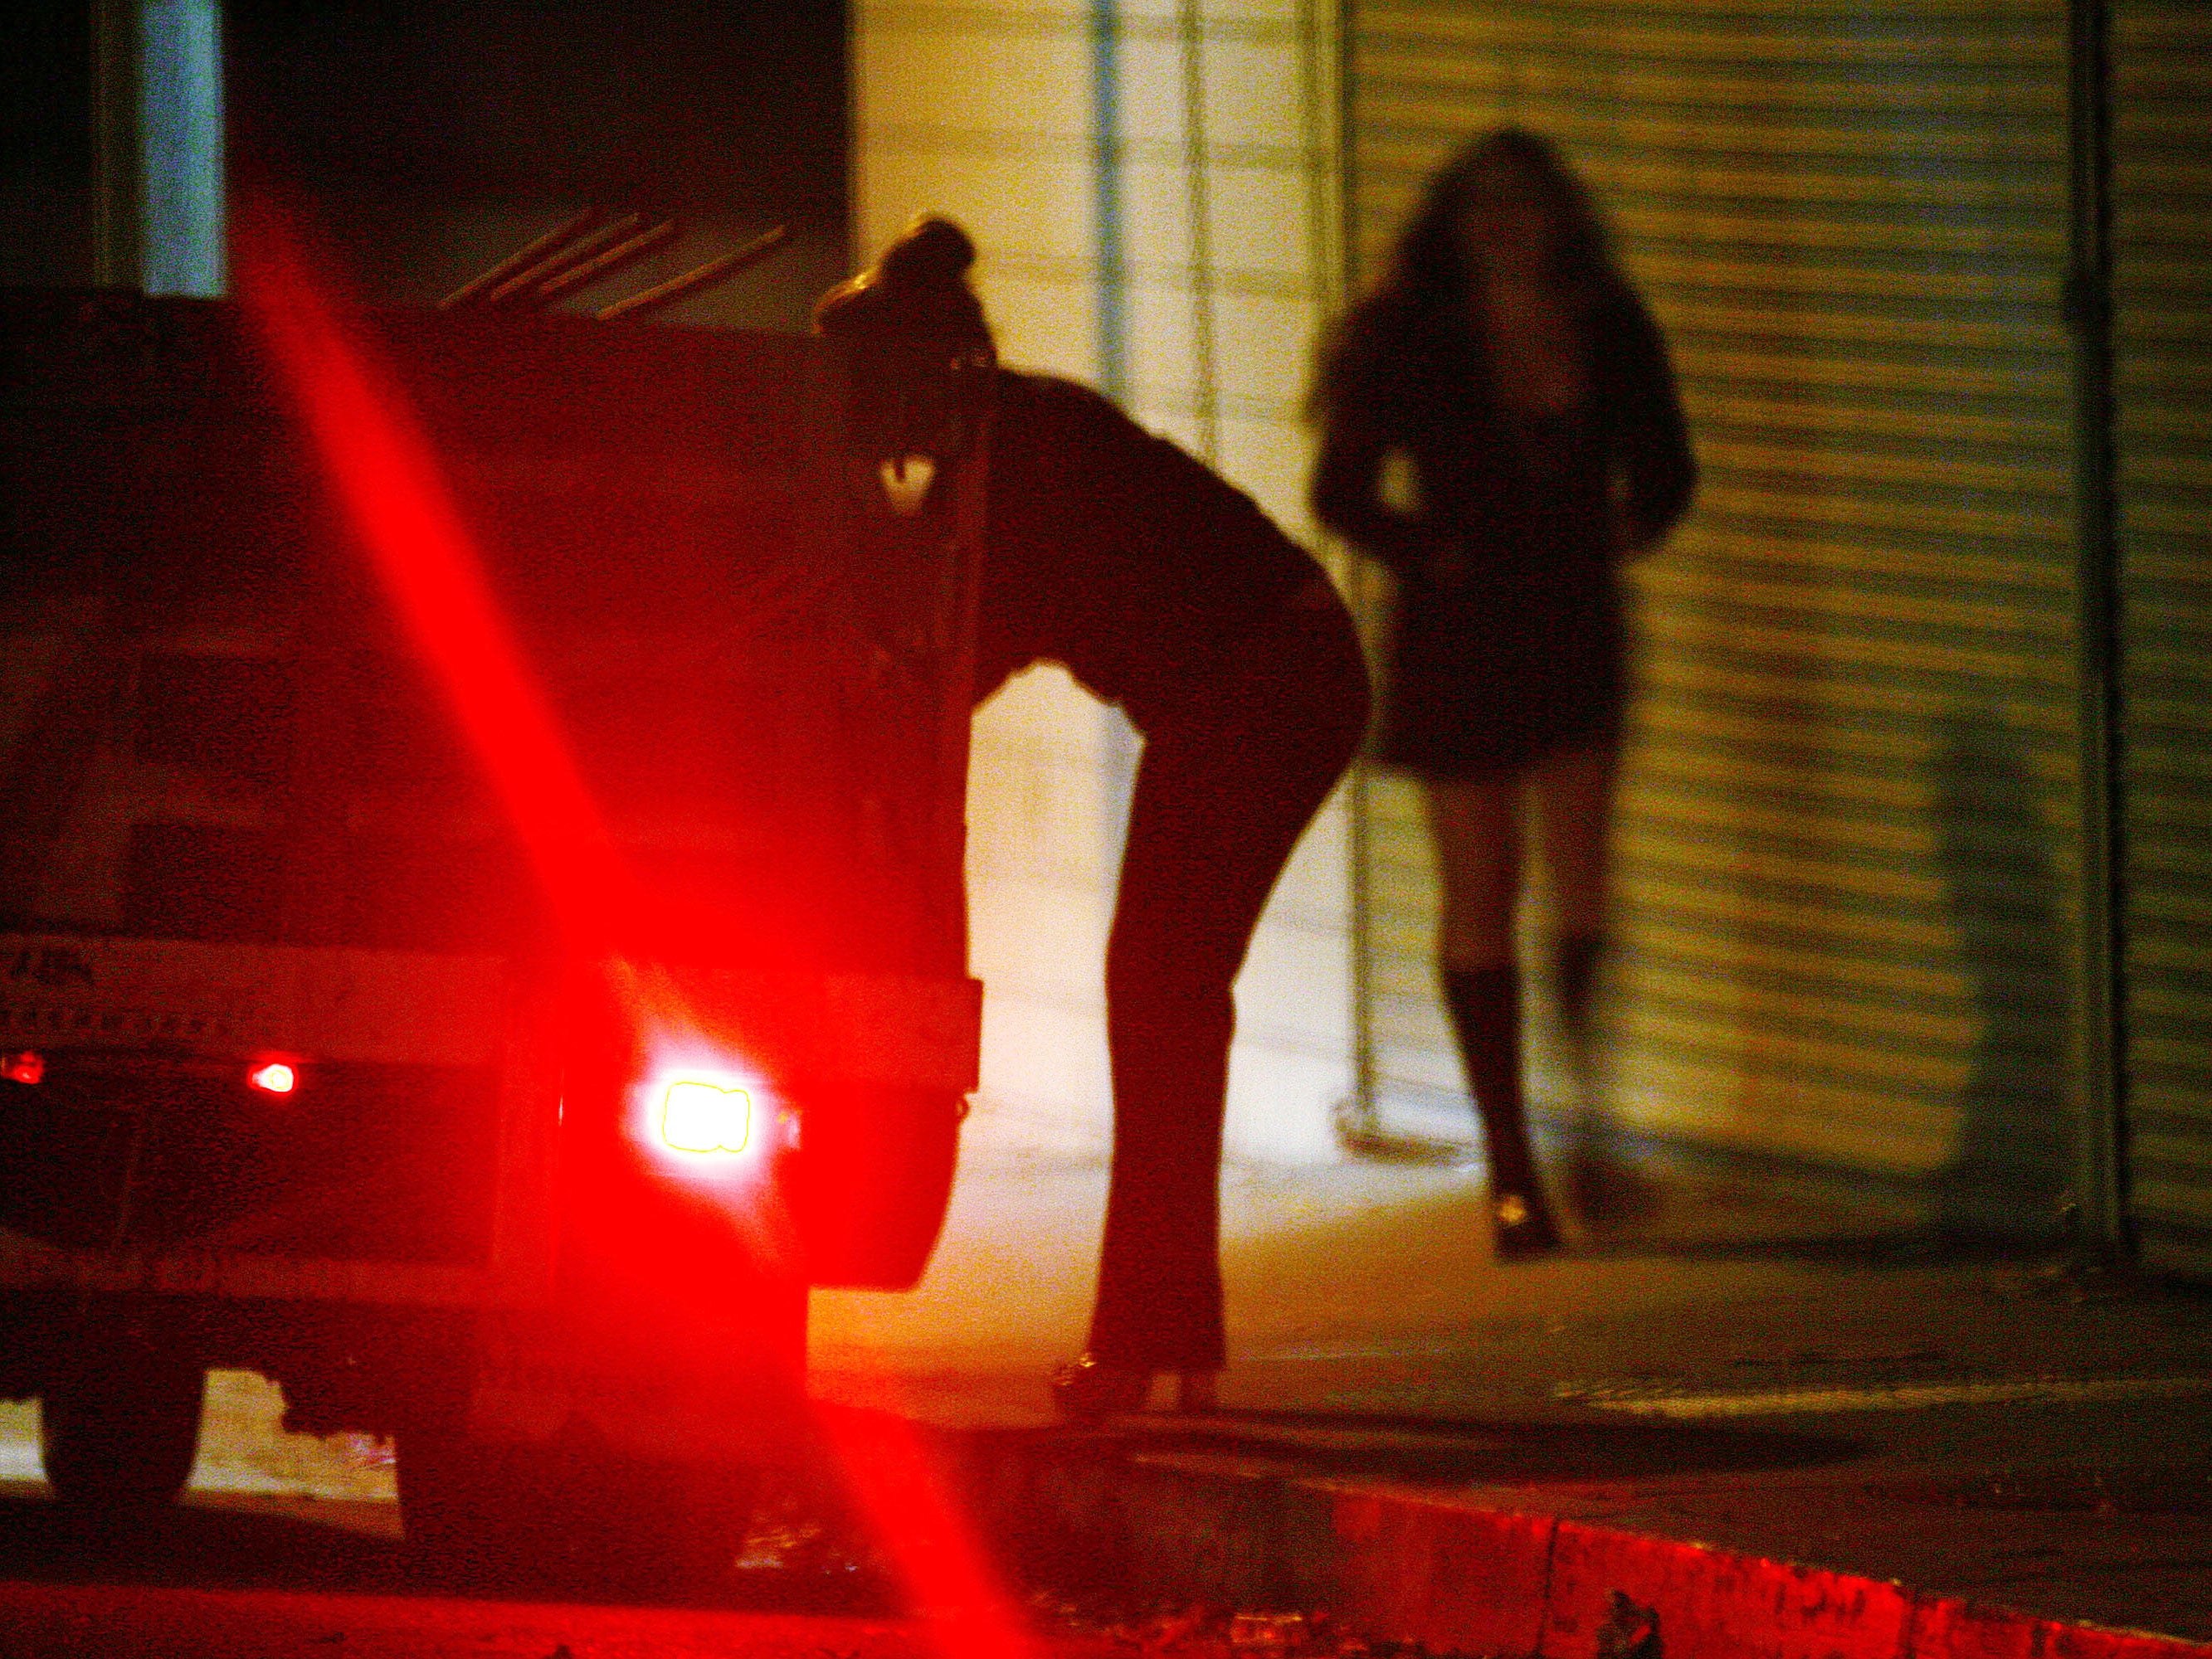 Amnesty International backed the proposal to officially support the legalisation of prostitution